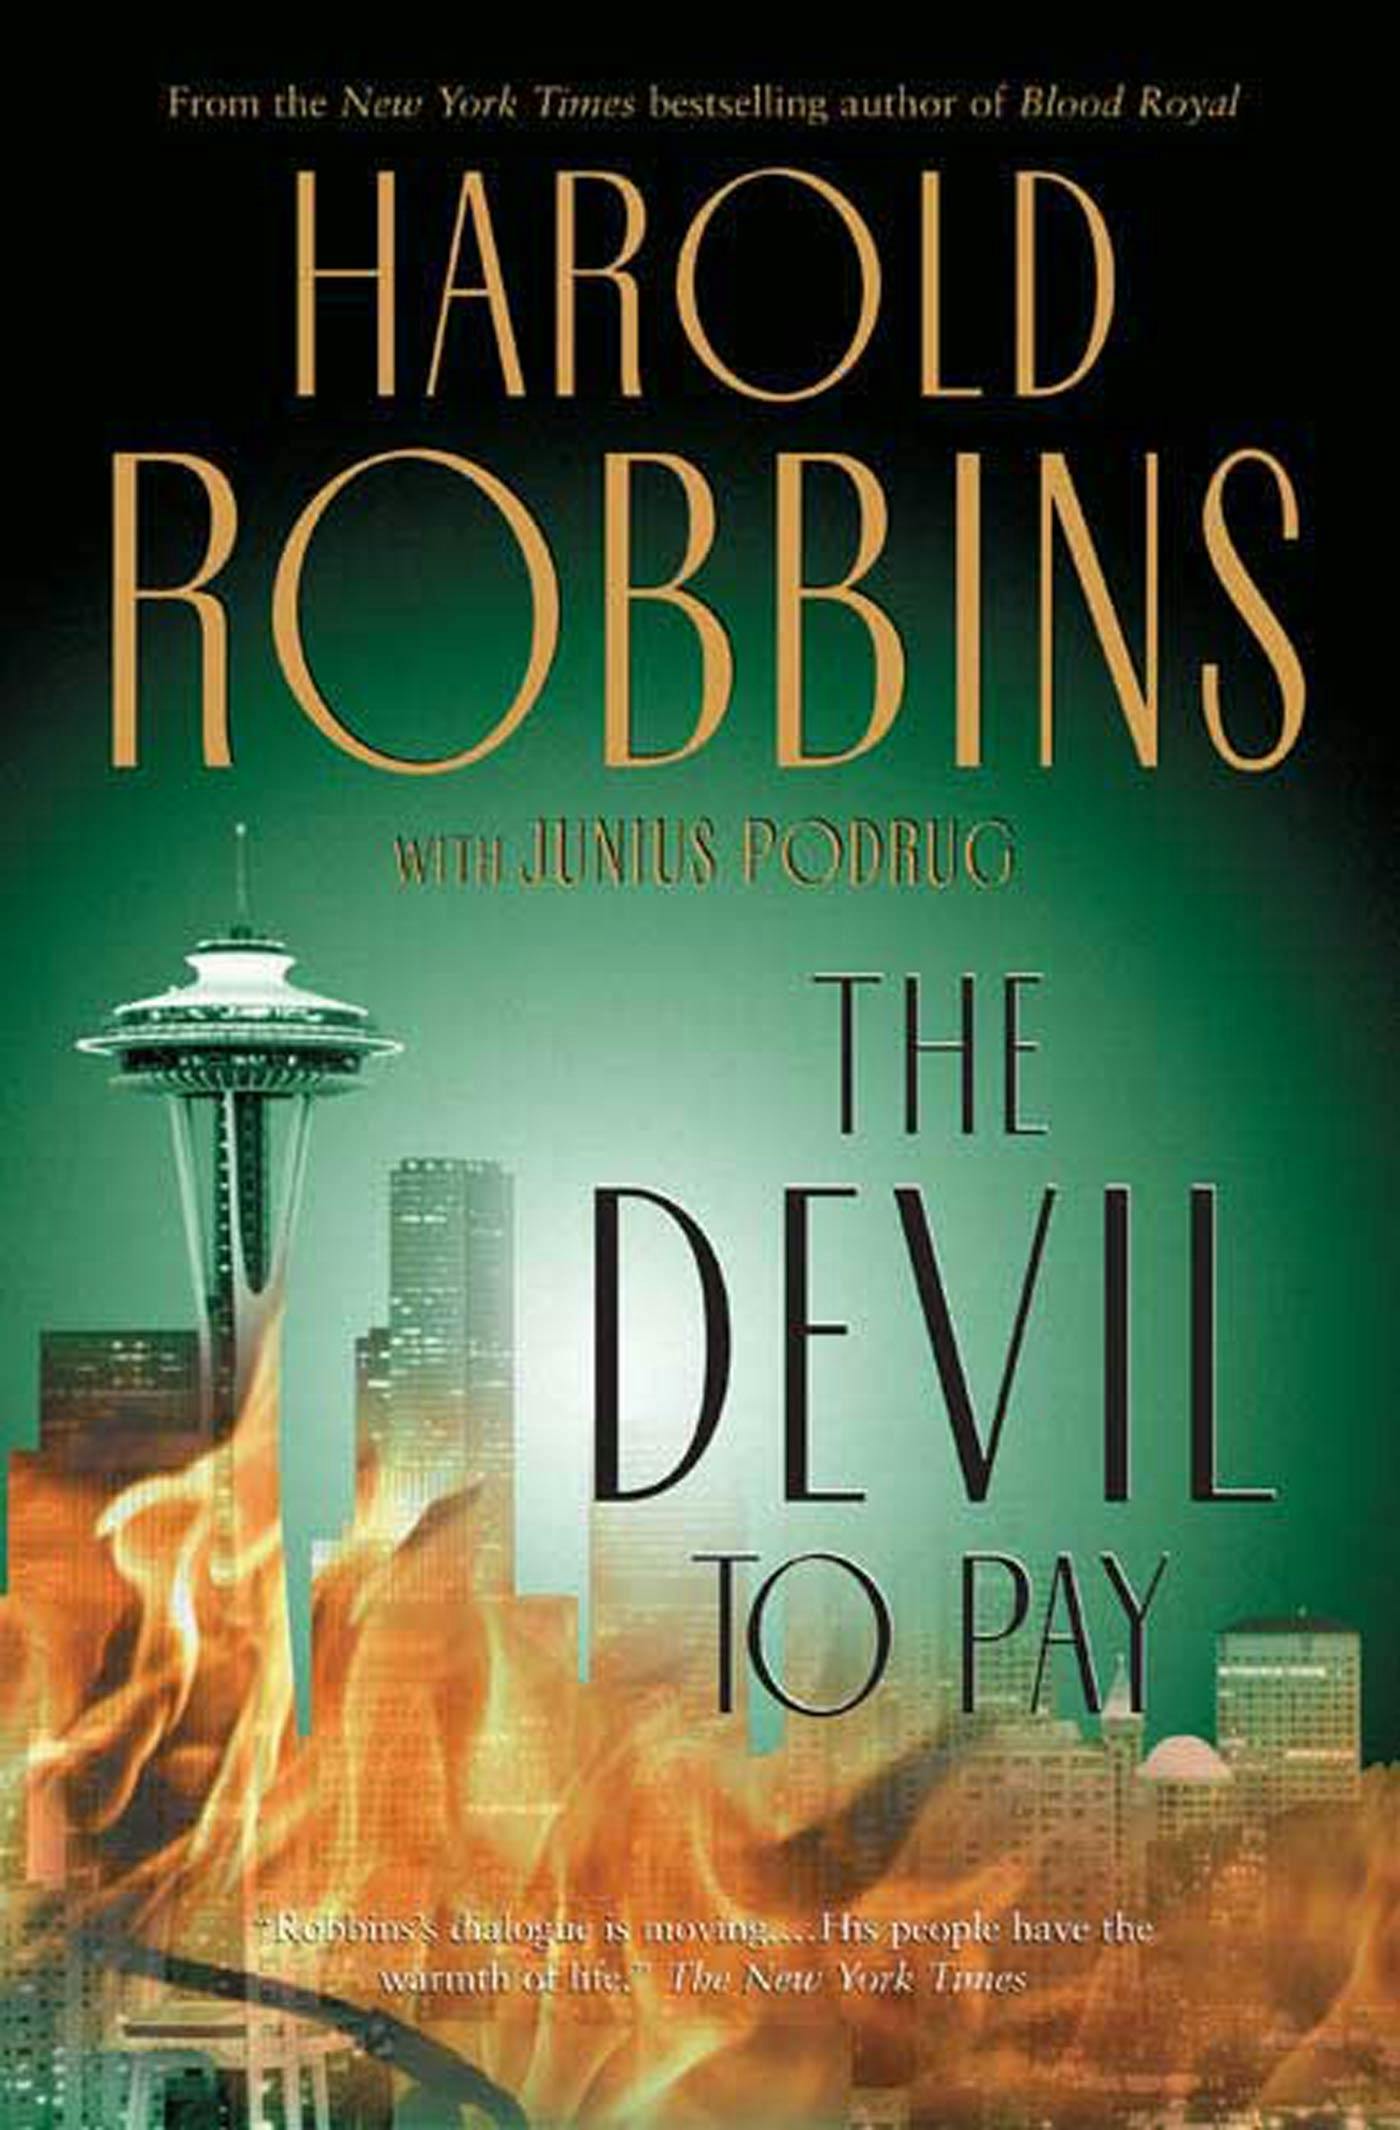 Cover for the book titled as: The Devil To Pay